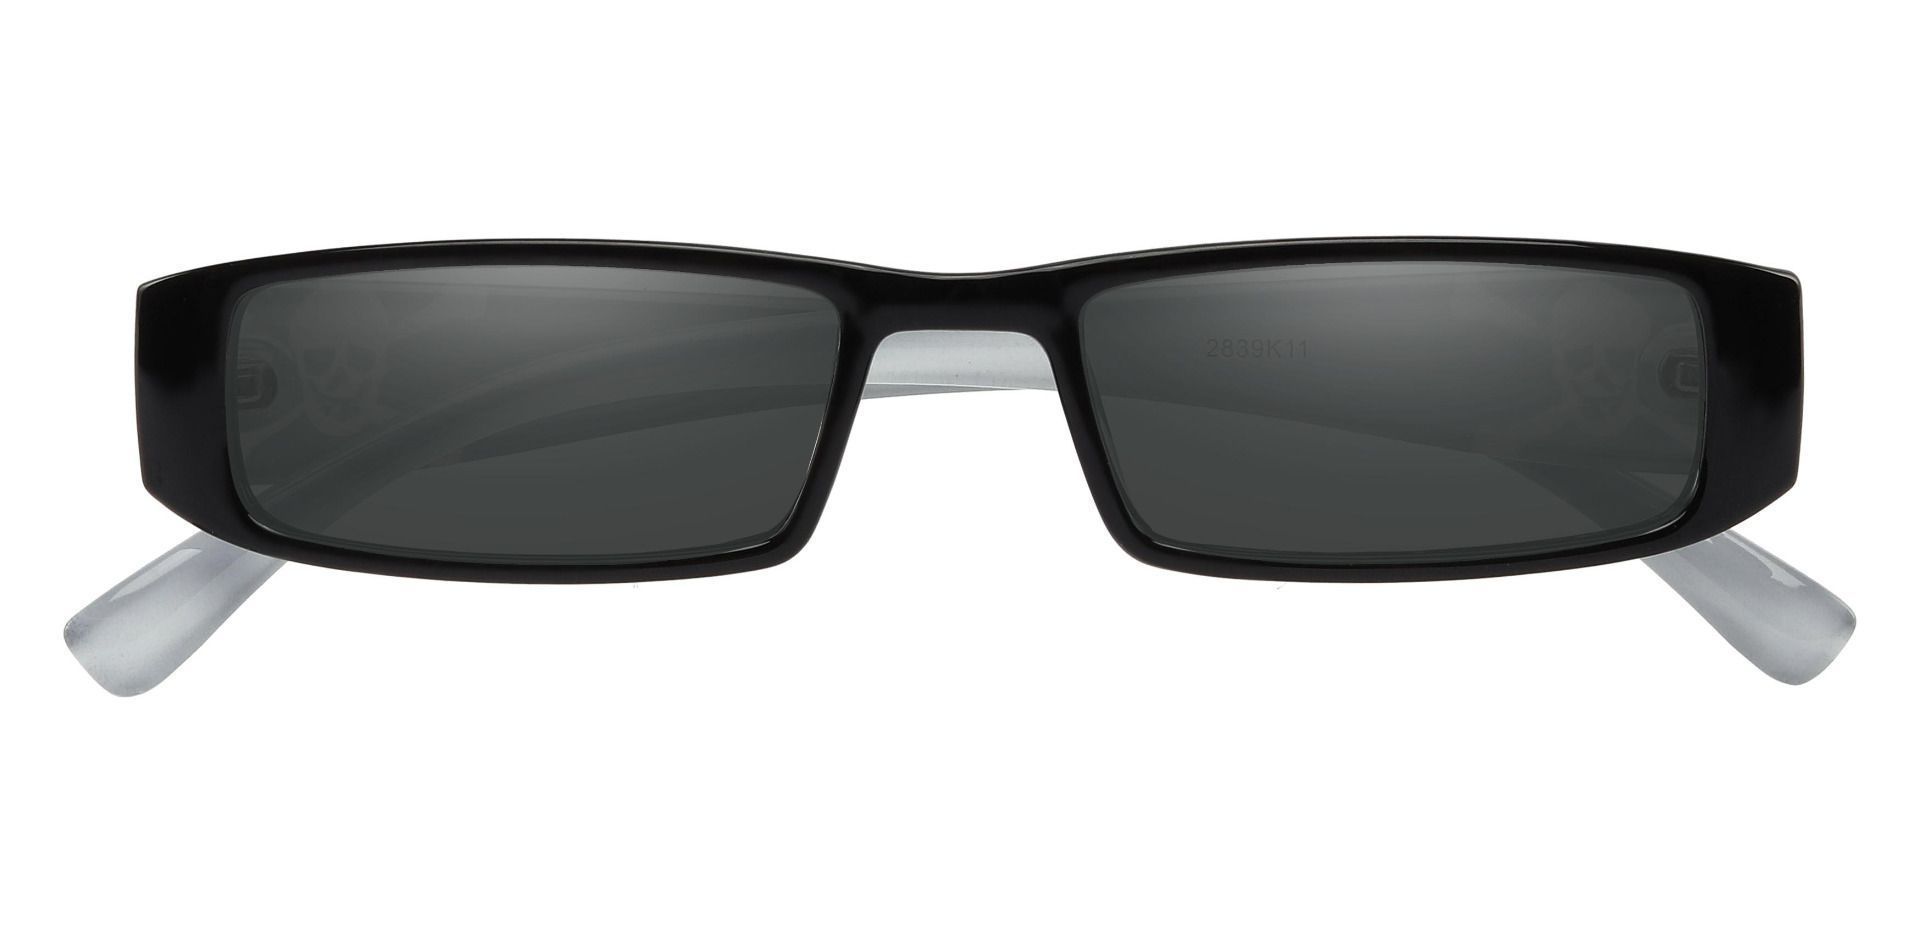 Buccaneer Rectangle Single Vision Sunglasses - Black Frame With Gray Lenses